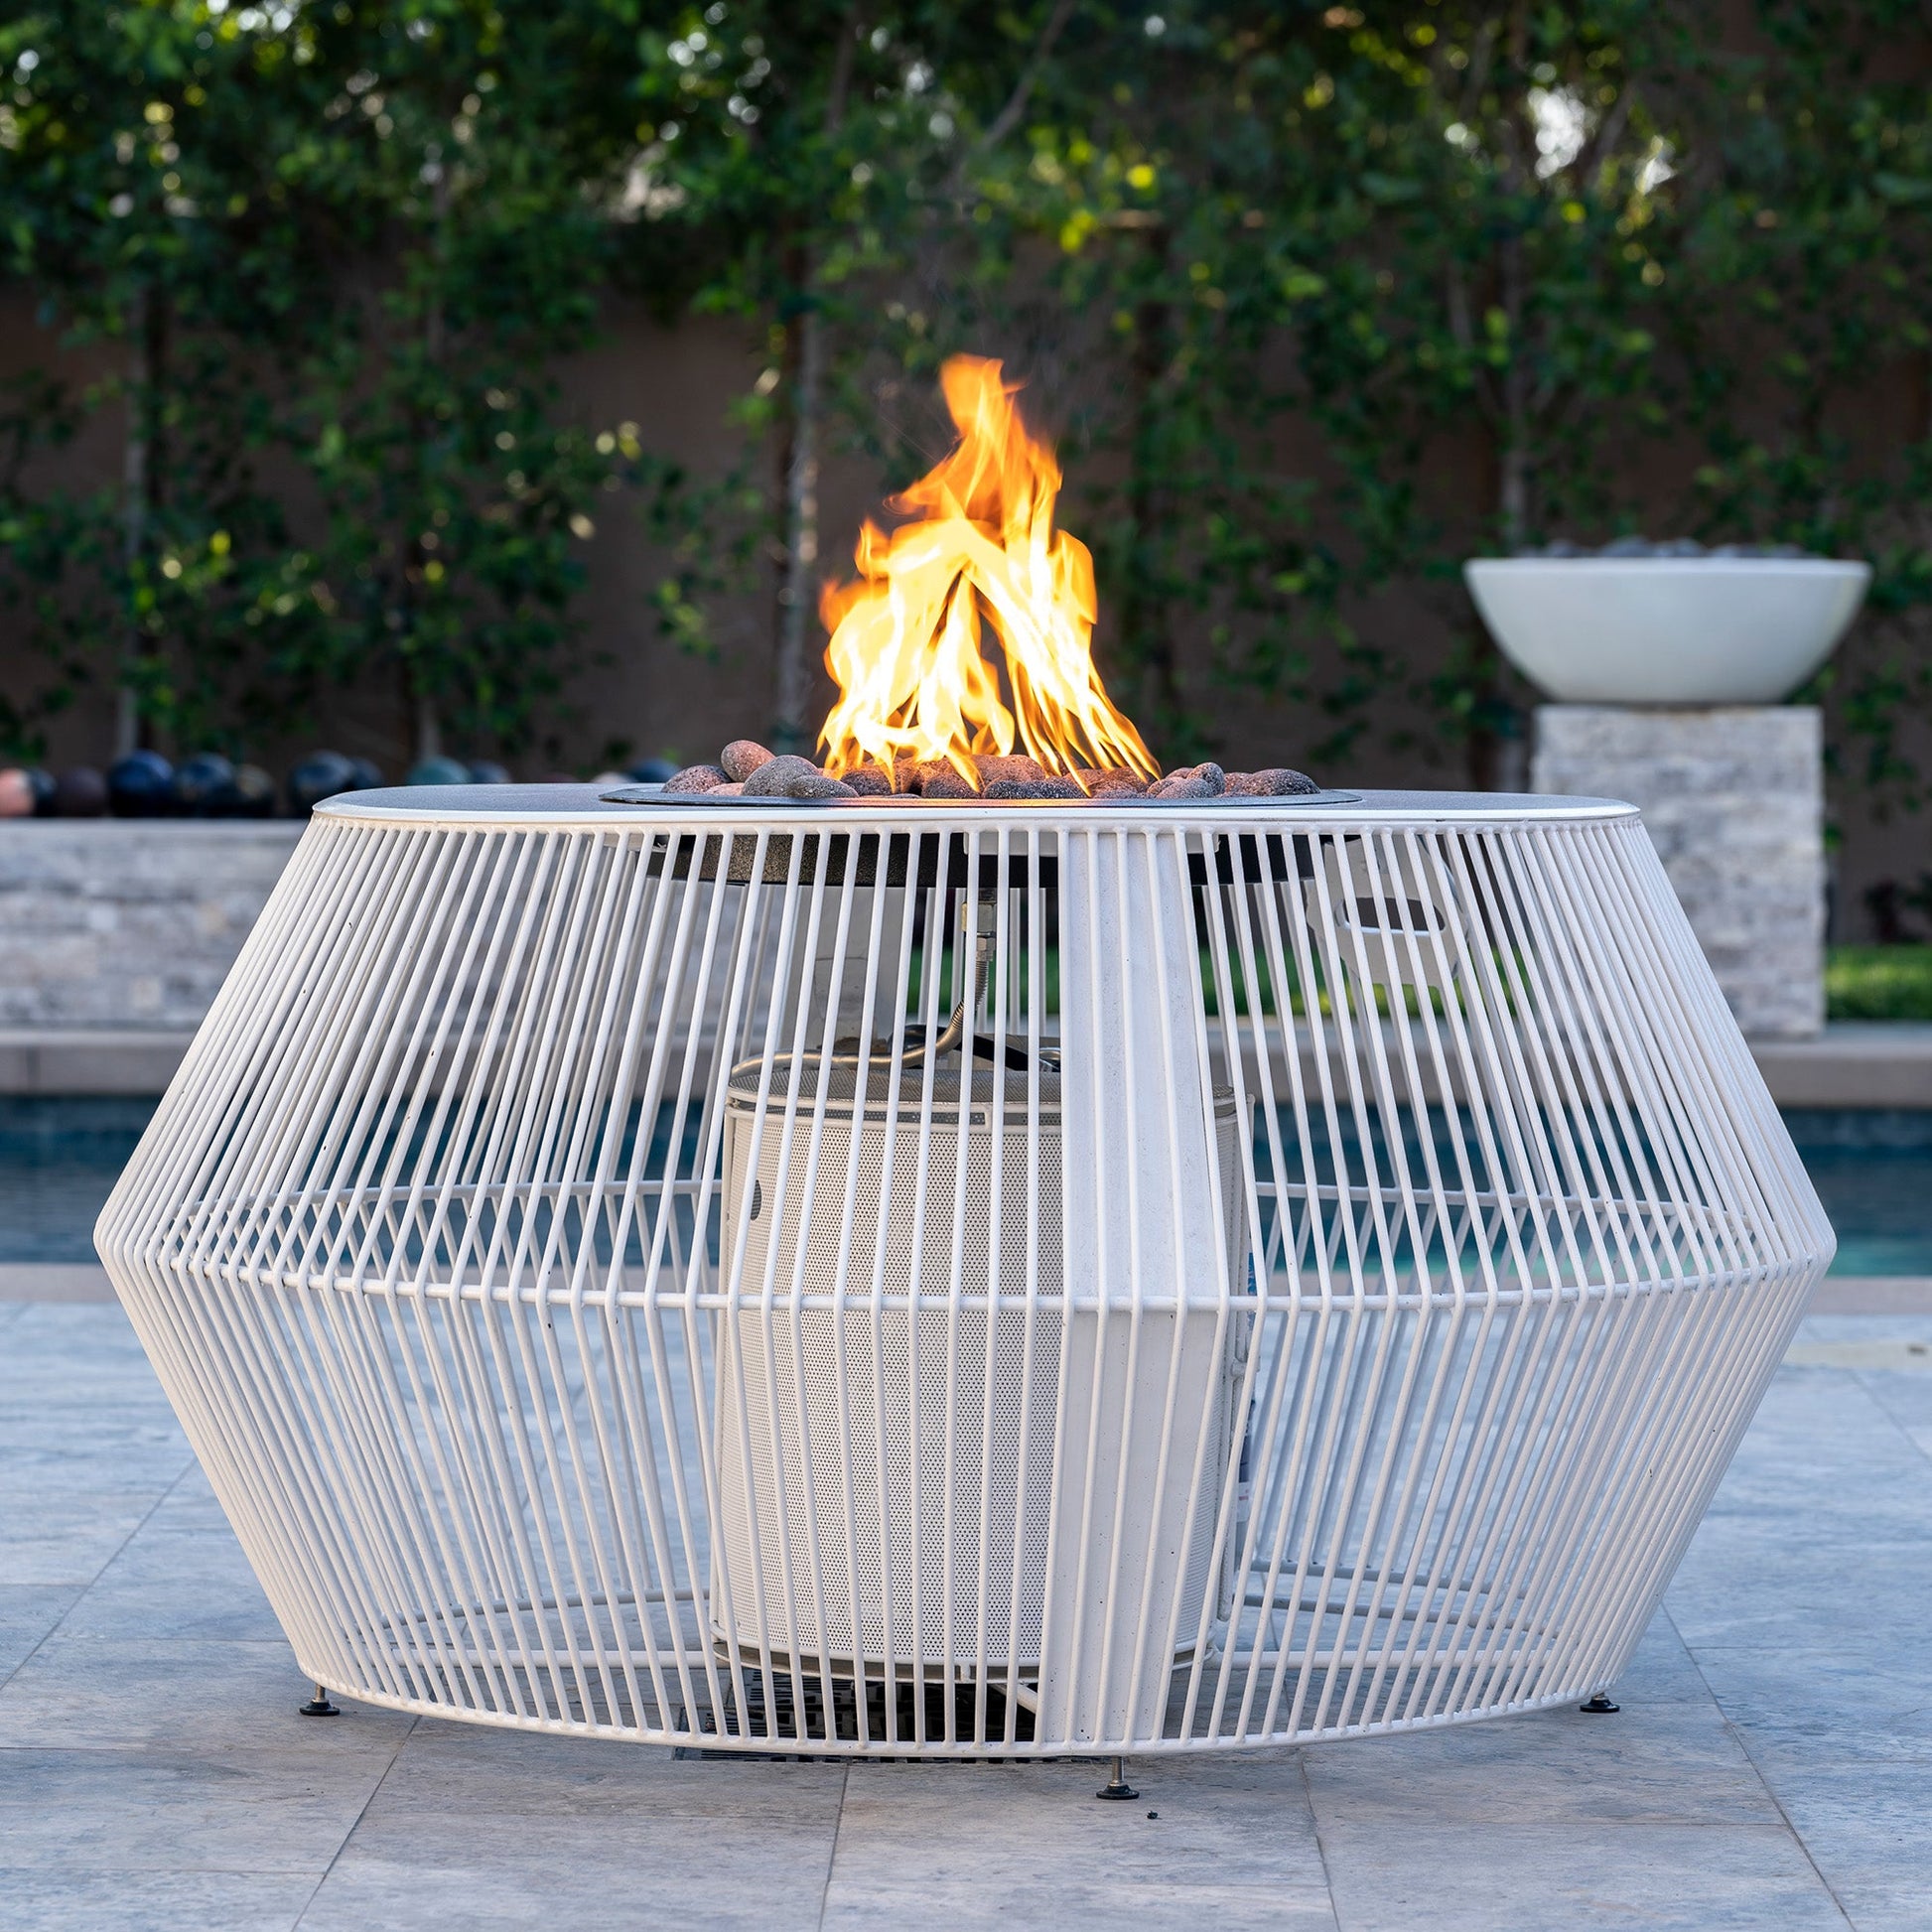 The Outdoor Plus Round Cesto 48" Powder Coated Liquid Propane Fire Pit with Match Lit with Flame Sense Ignition